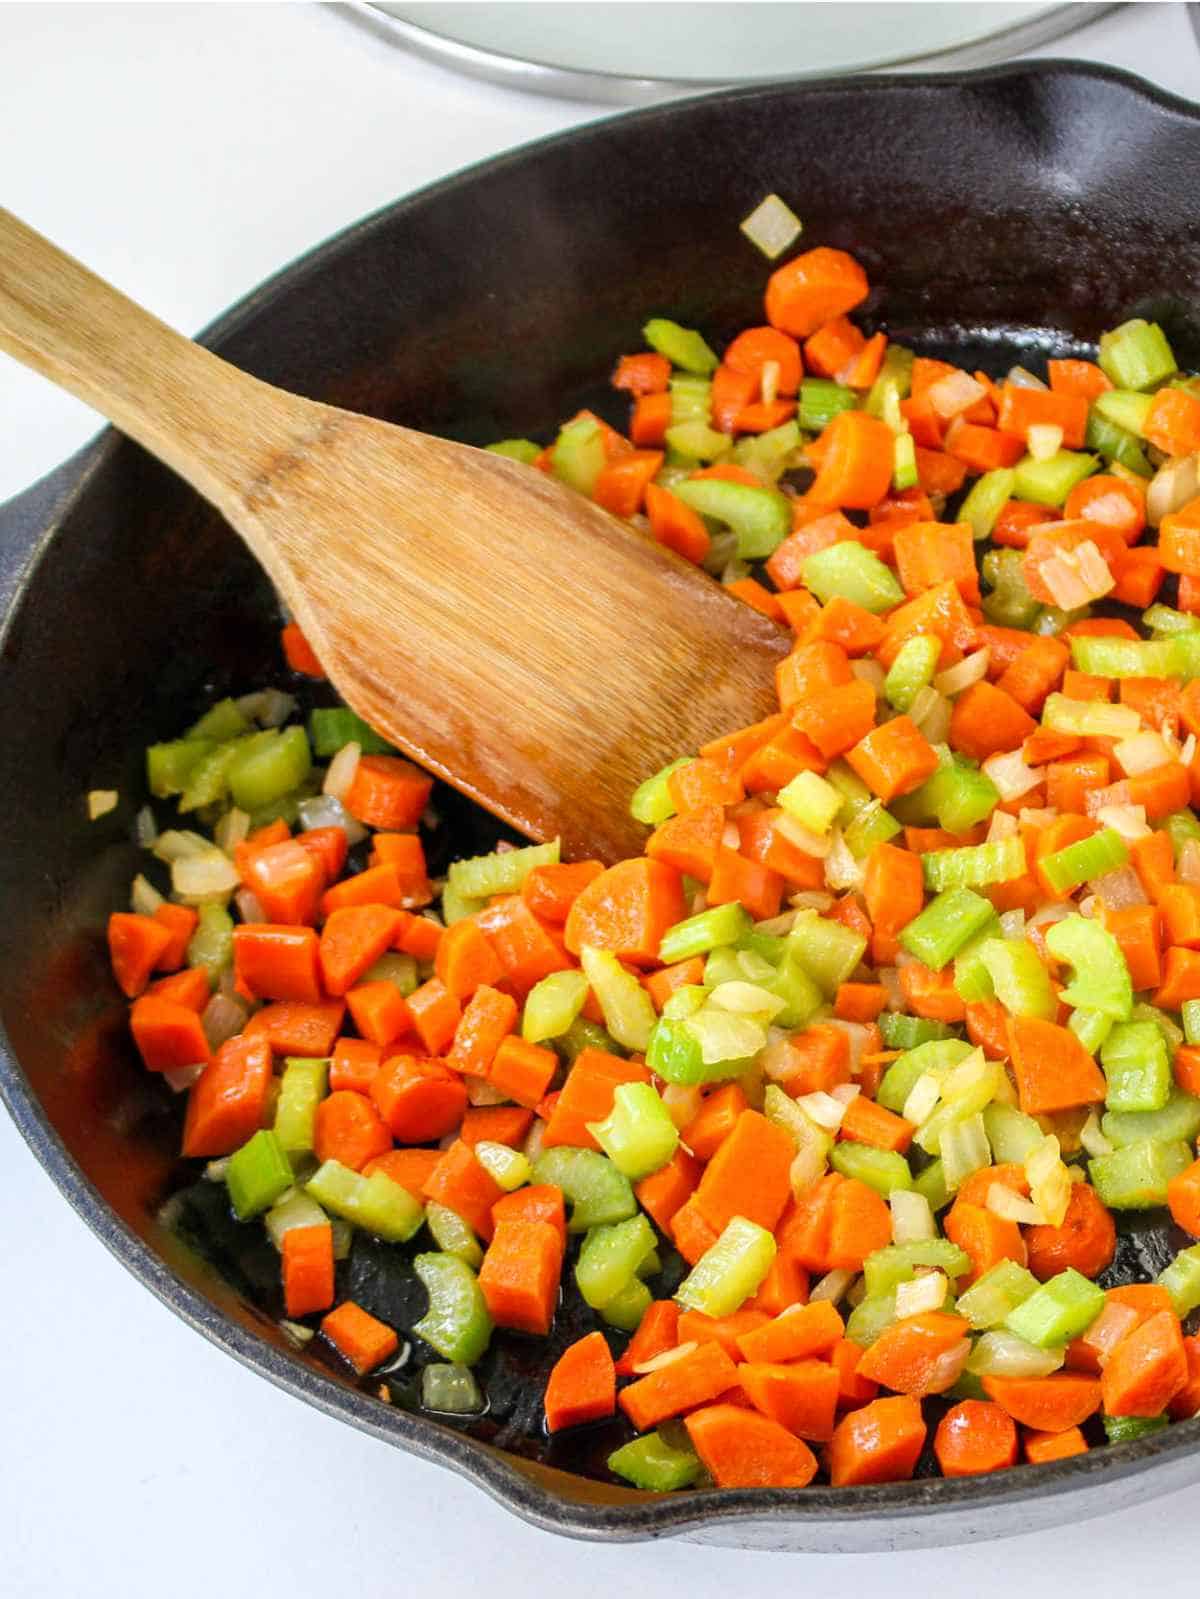 sauteing carrots, onion, and celery in a cast iron skillet.